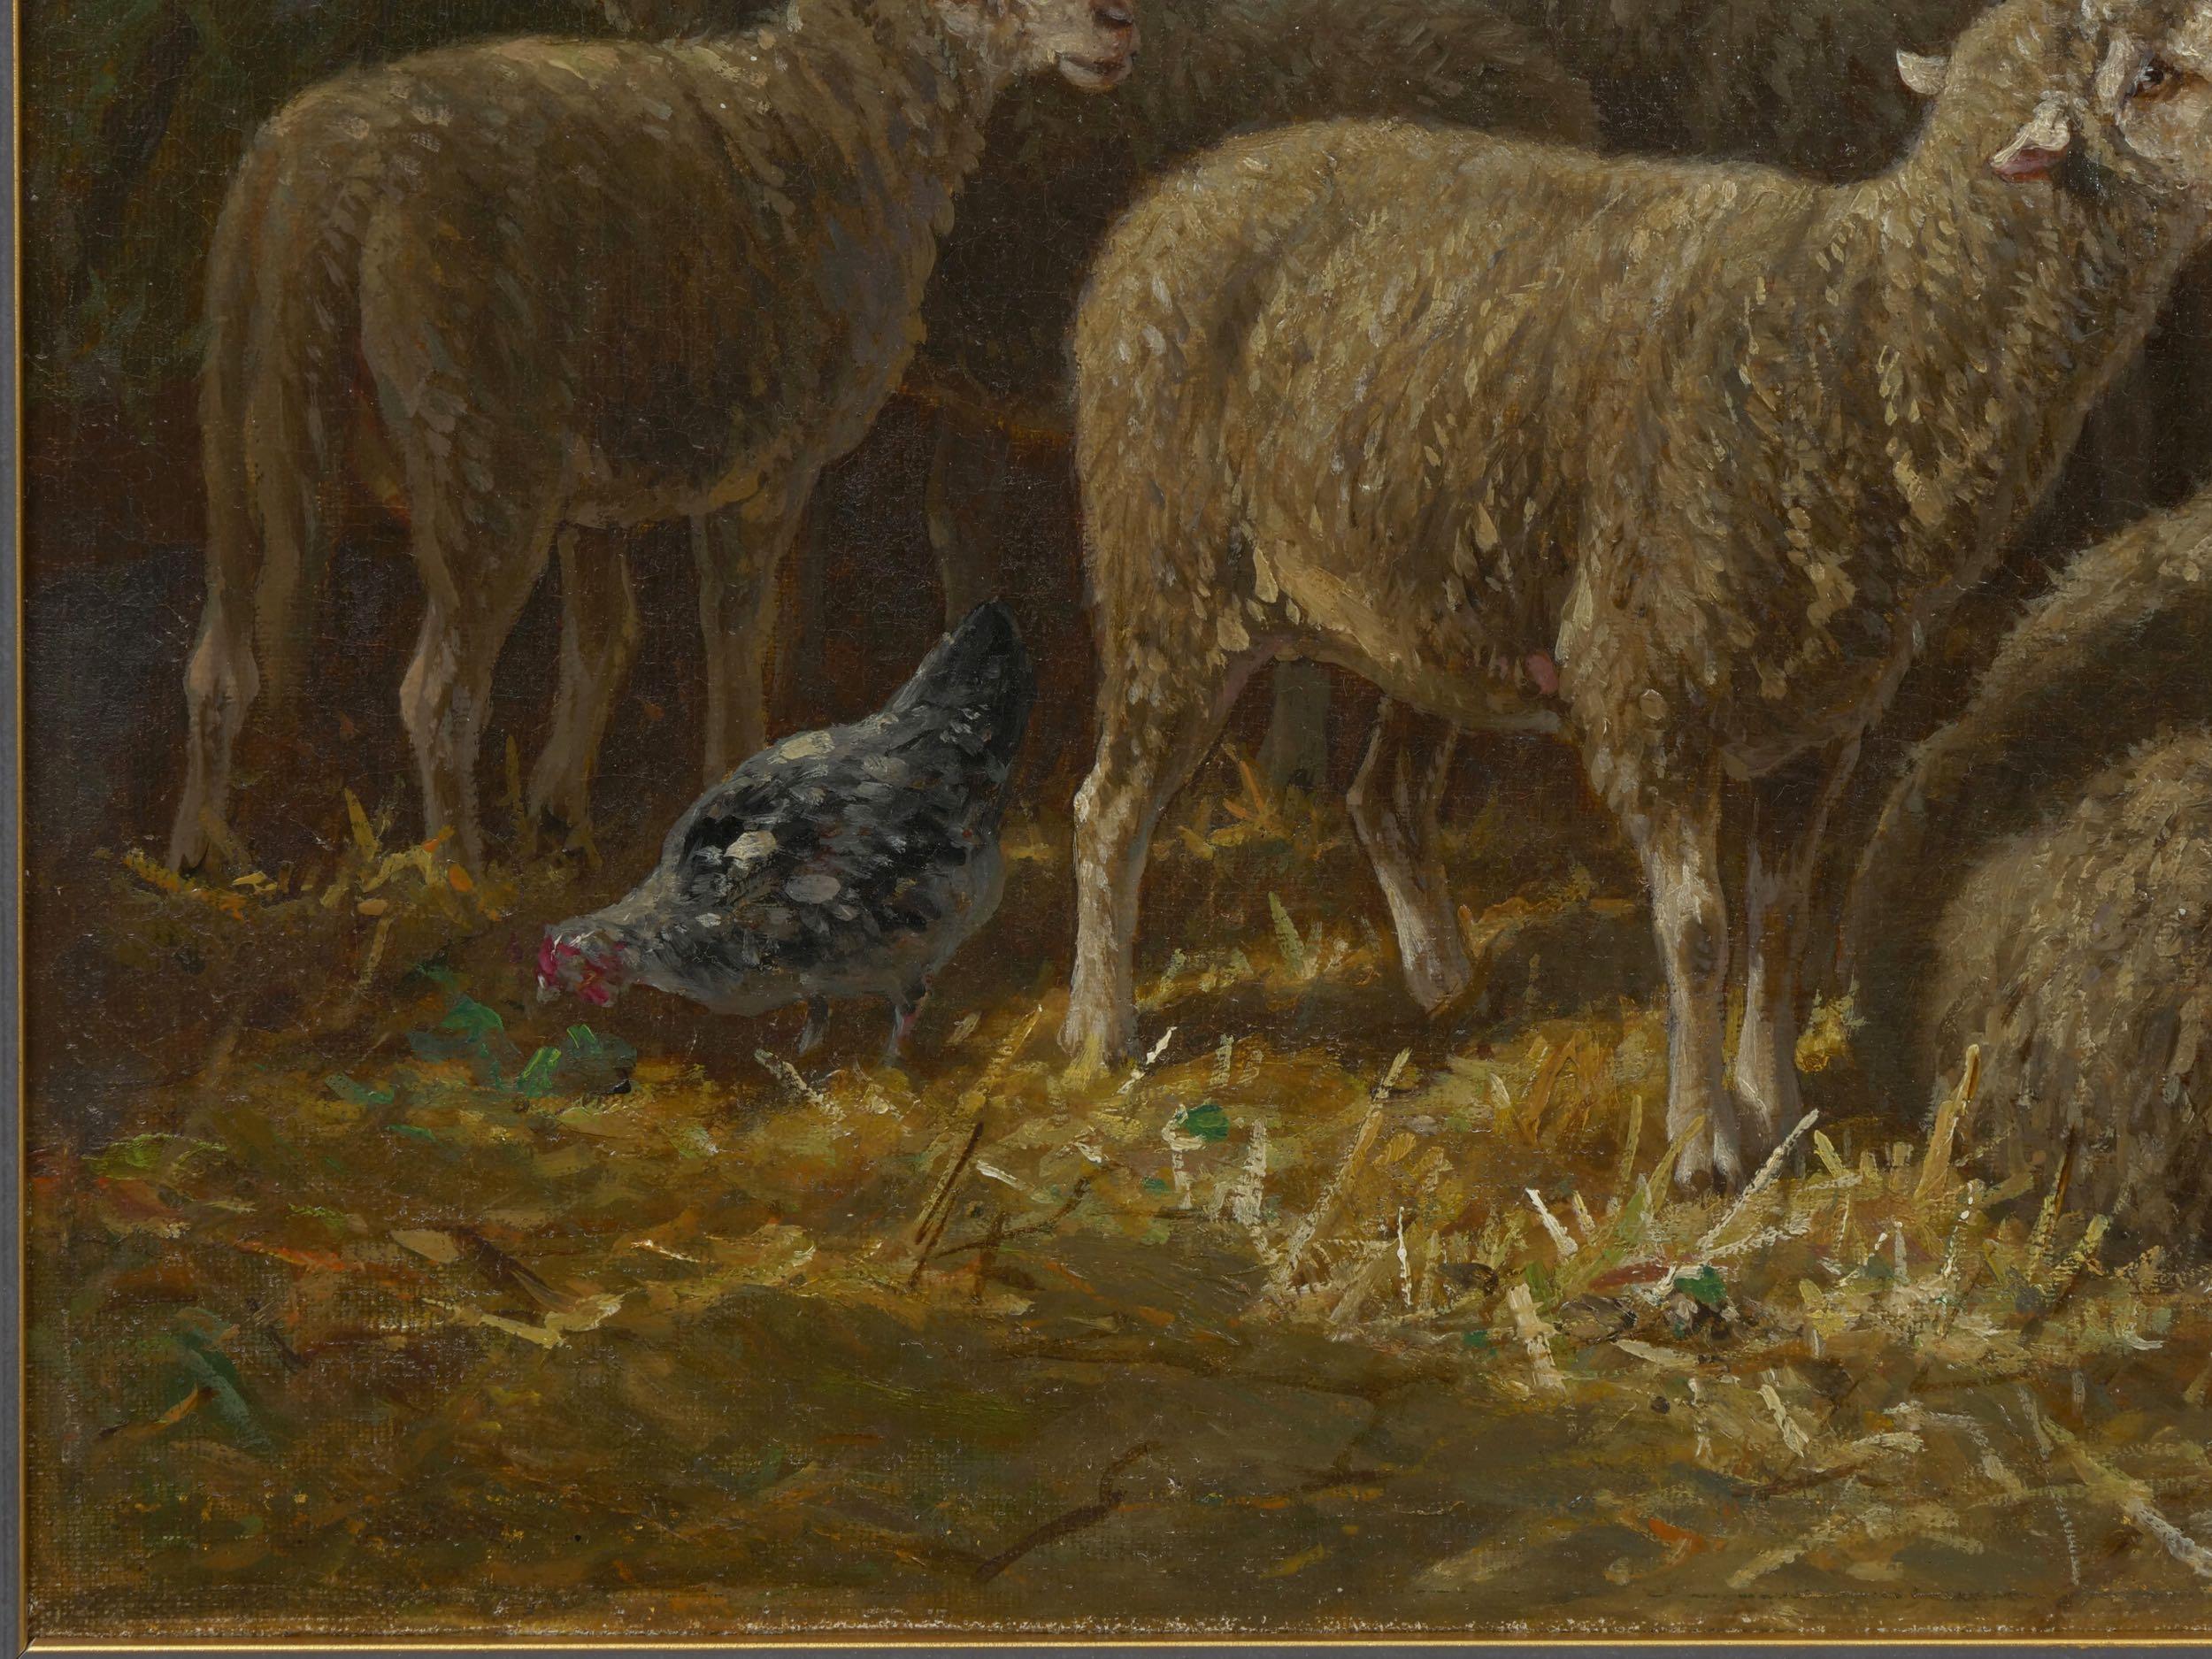 Oiled “Sheep Inside a Barn” French Barbizon Painting by Charles-Ferdinand Ceramano